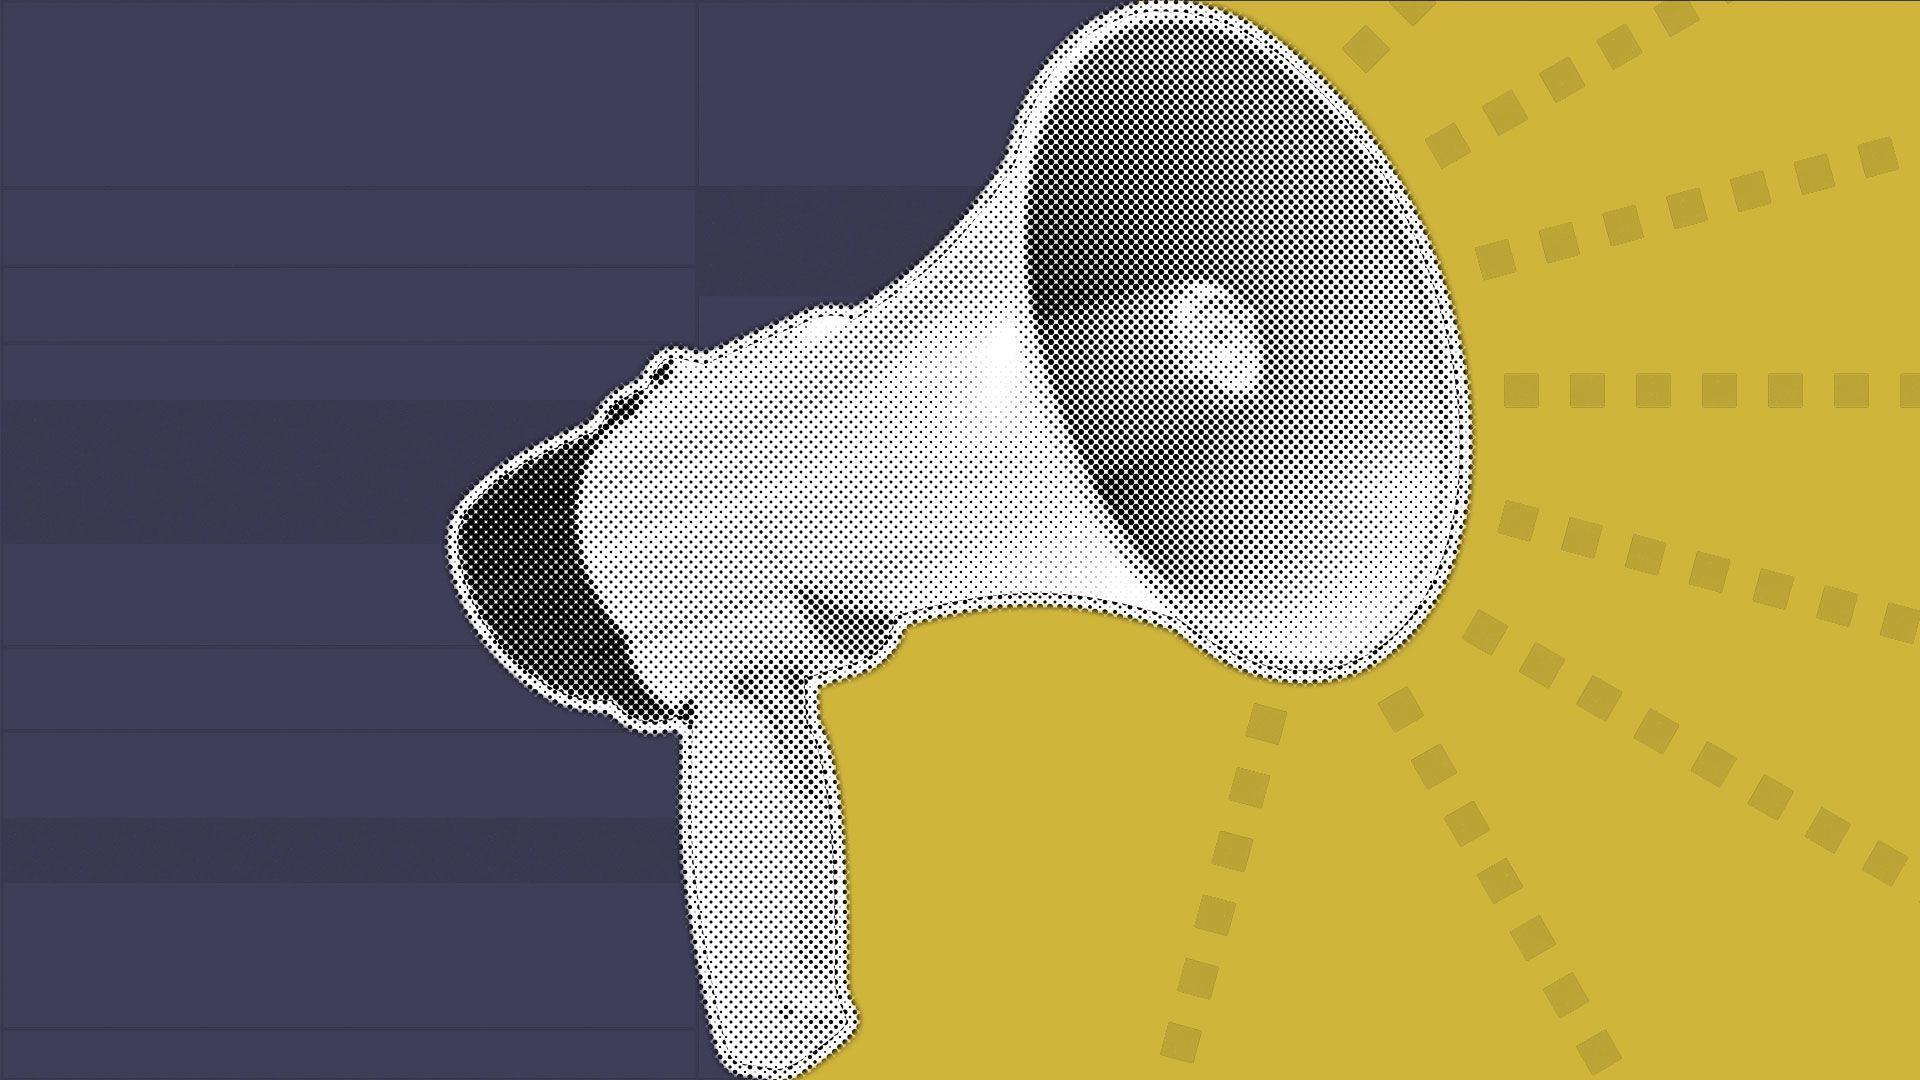 Illustration of a megaphone surrounded by ballot shapes.